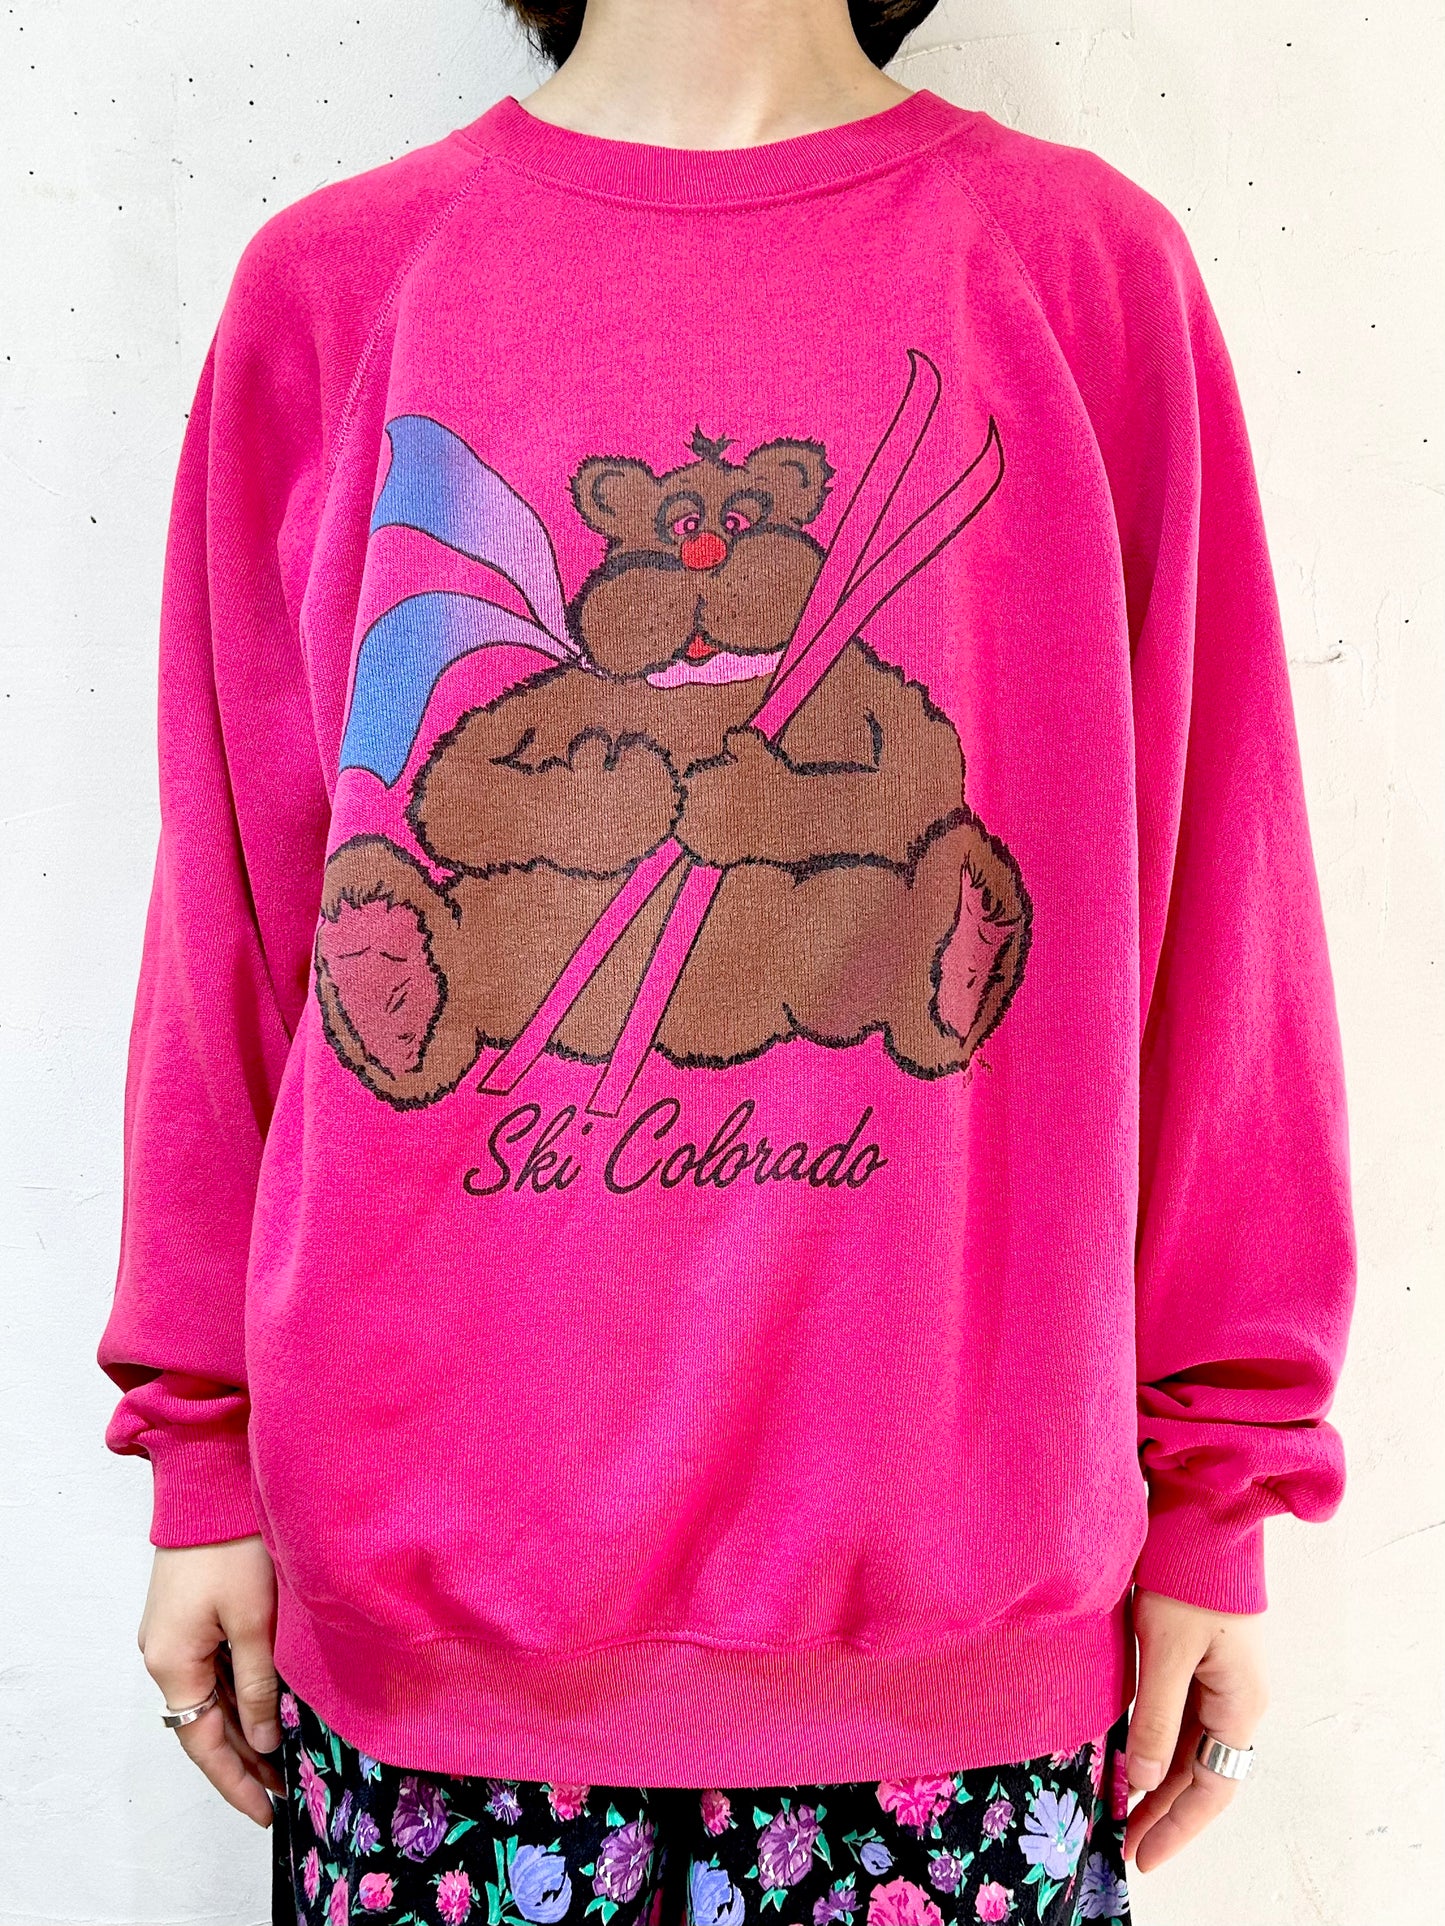 ’80s Vintage Sweat MADE IN USA [J25304]